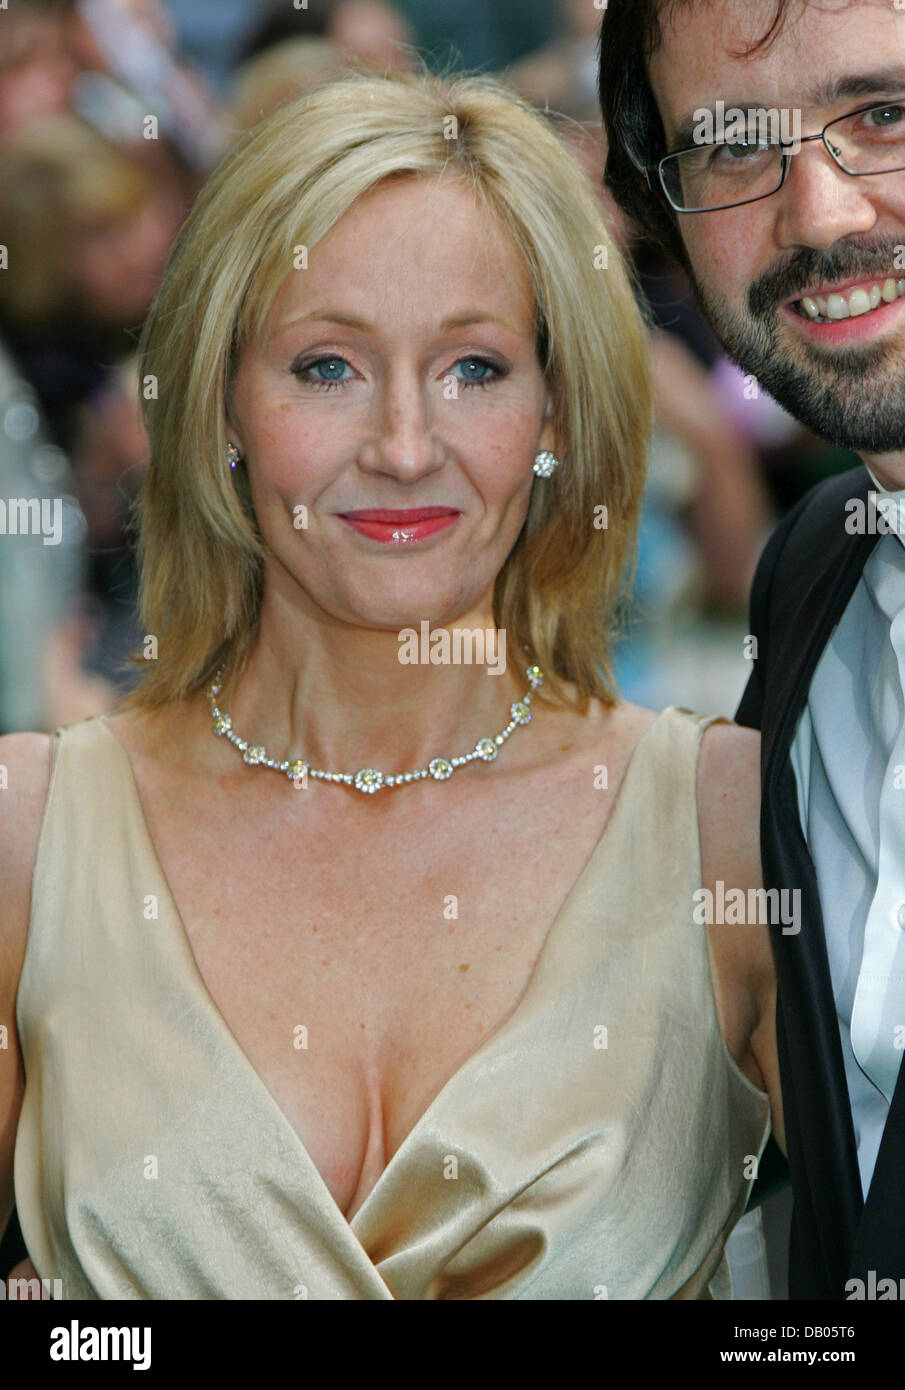 British author Joanne K. Rowling (L) and her husband Neil Murray arrive for the UK premiere of 'Harry Potter and the Order of the Phoenix' at Leicester Square in London, United Kingdom, 03 July 2007. The film based on Rowling's popular book sequel will be in cinemas on July 12th. Photo: Hubert Boesl Stock Photo